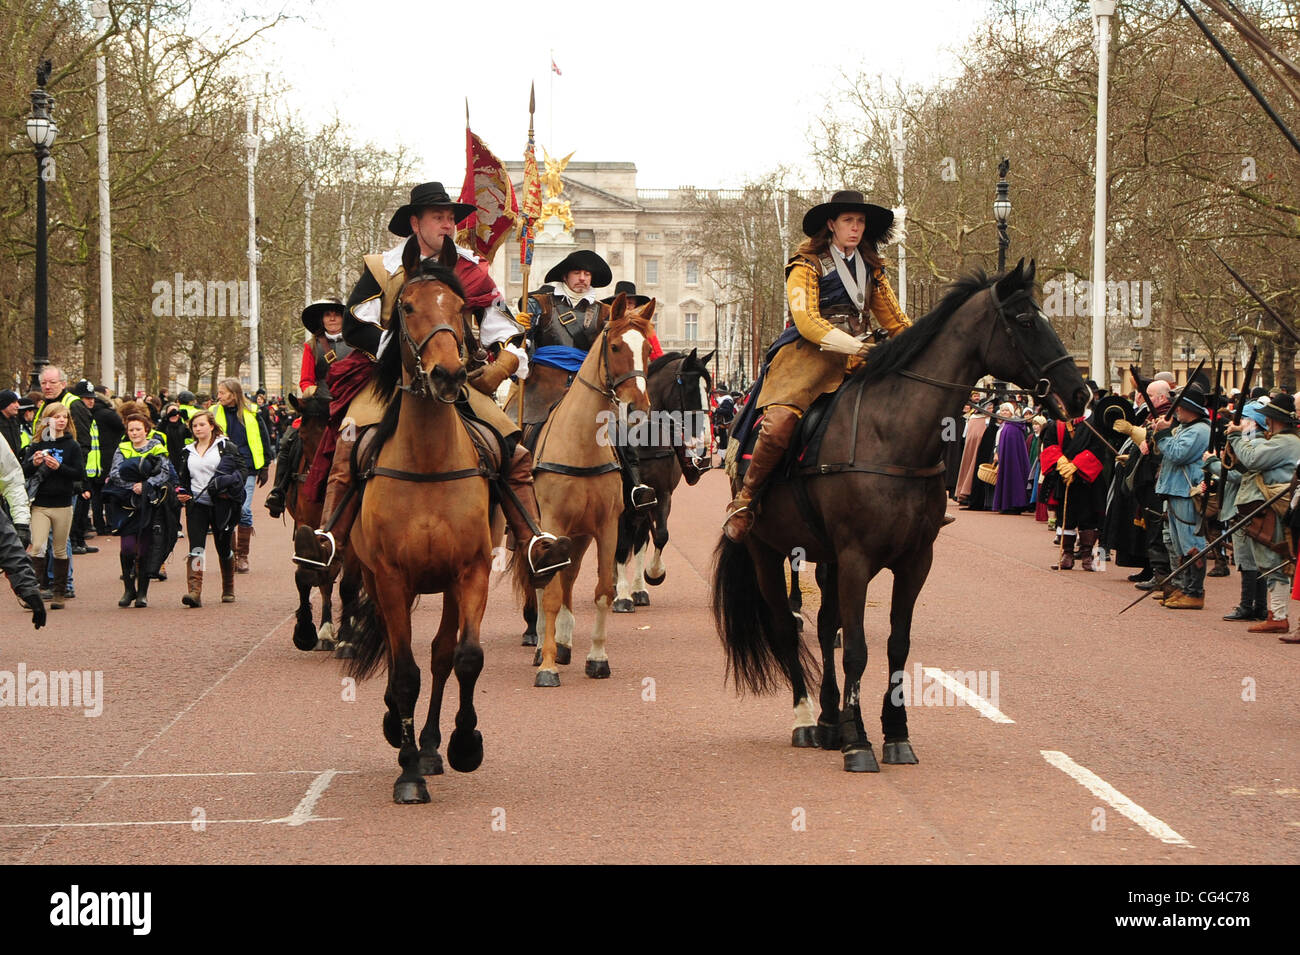 Charles I Commemoration march. The event commemorates the execution of King Charles I on 30 January 1649. London, England - 30.01.11 Stock Photo